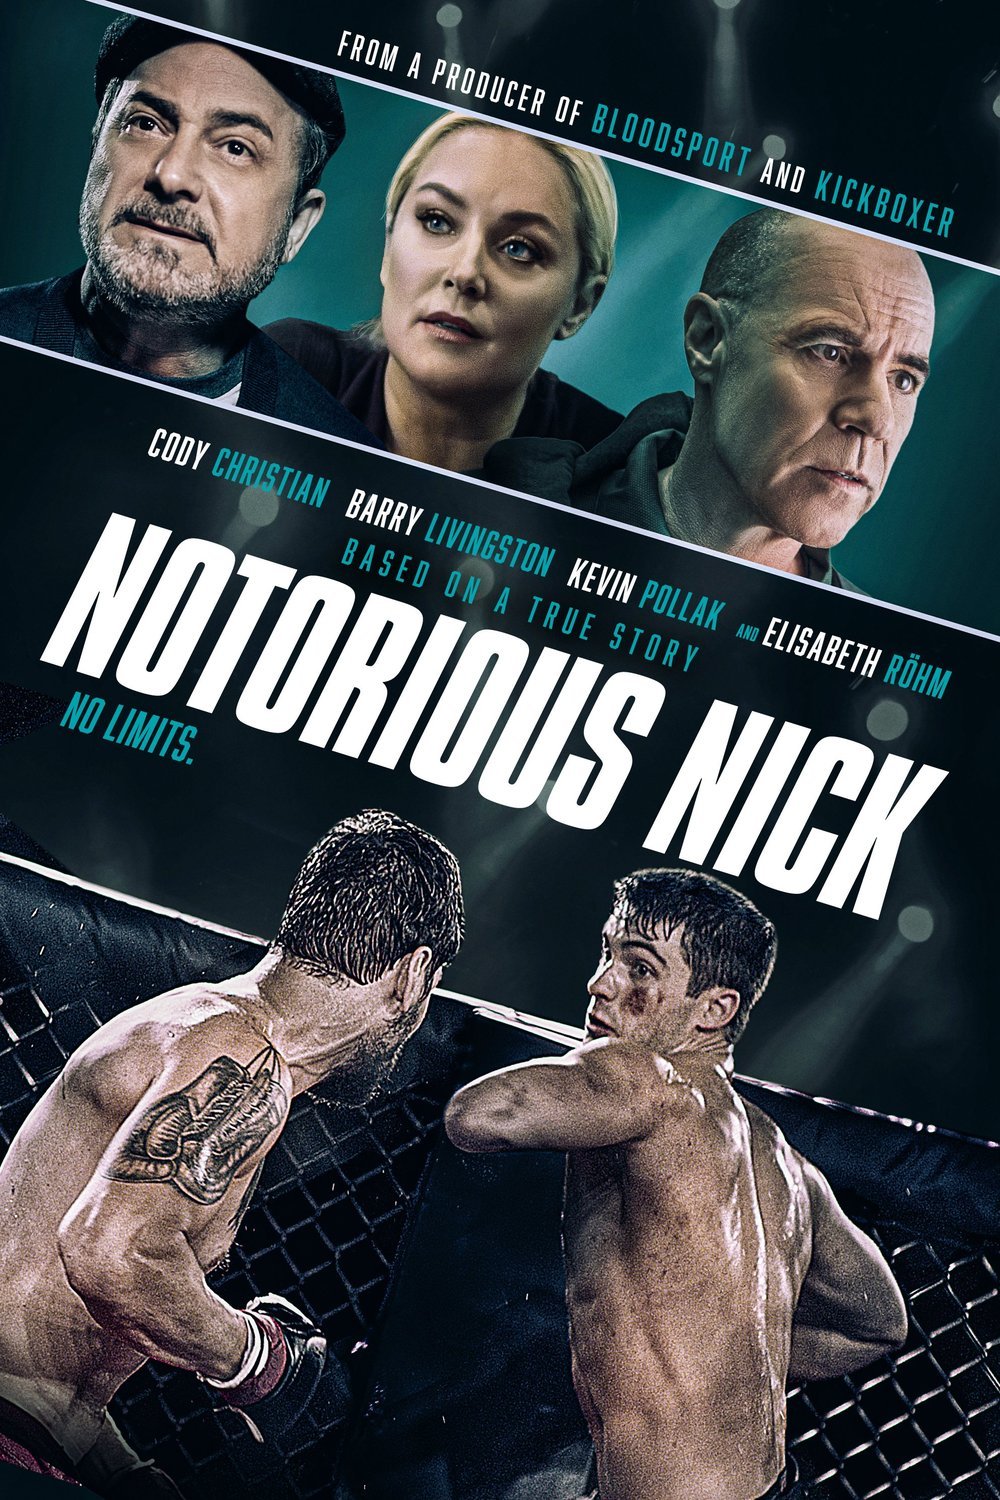 Poster of the movie Notorious Nick